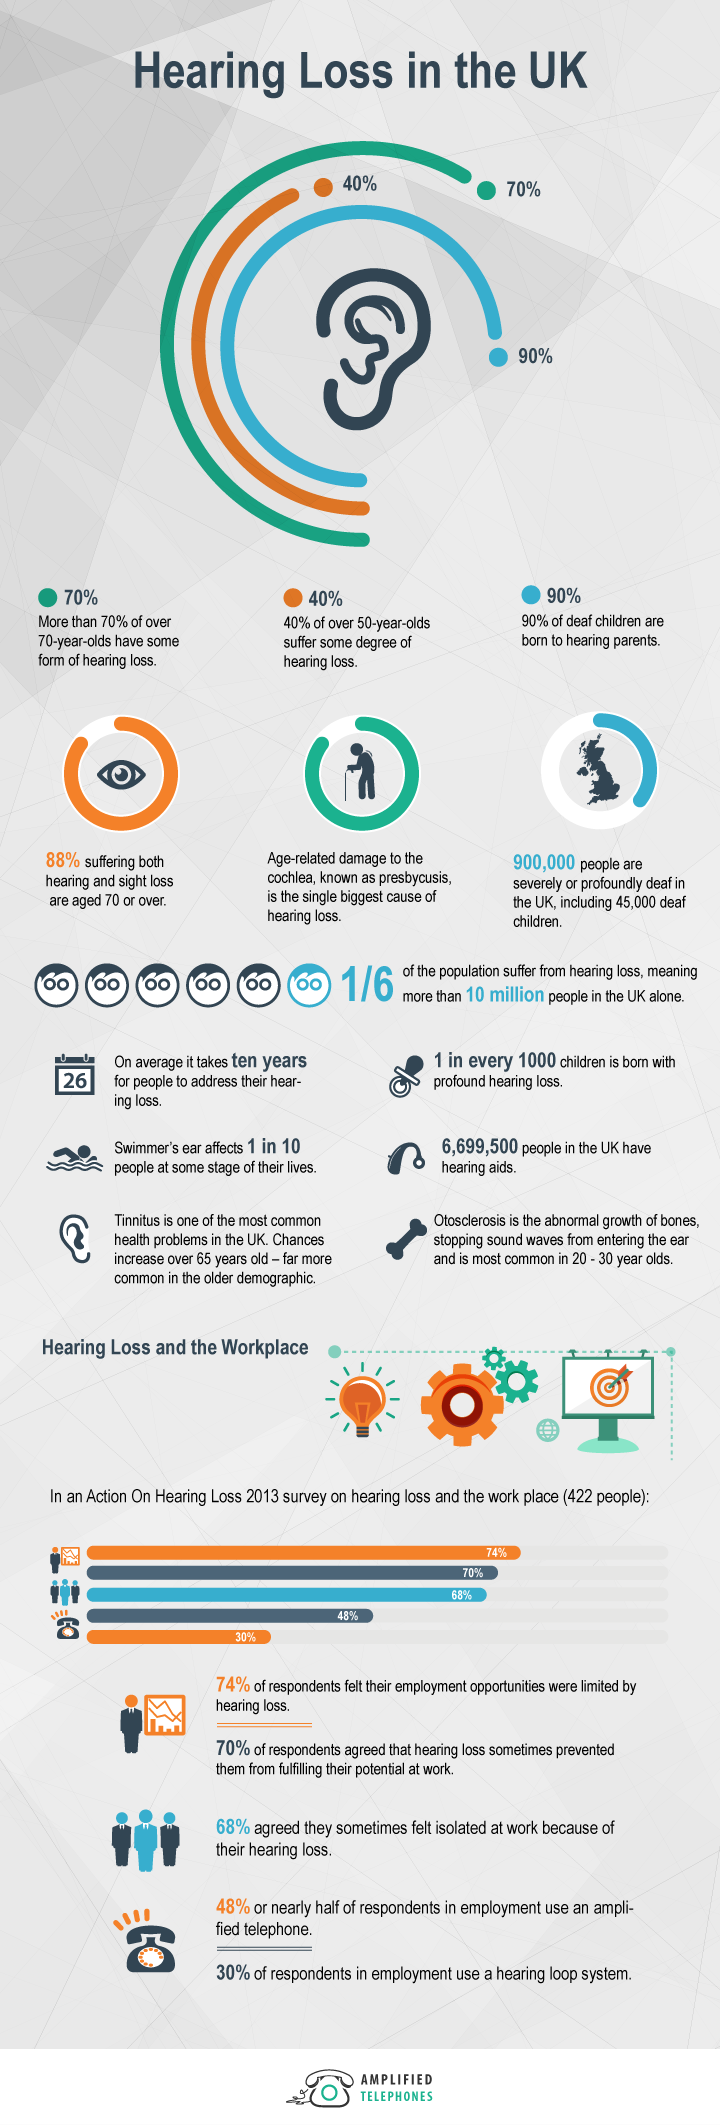 Learn More About Hearing Loss in the UK